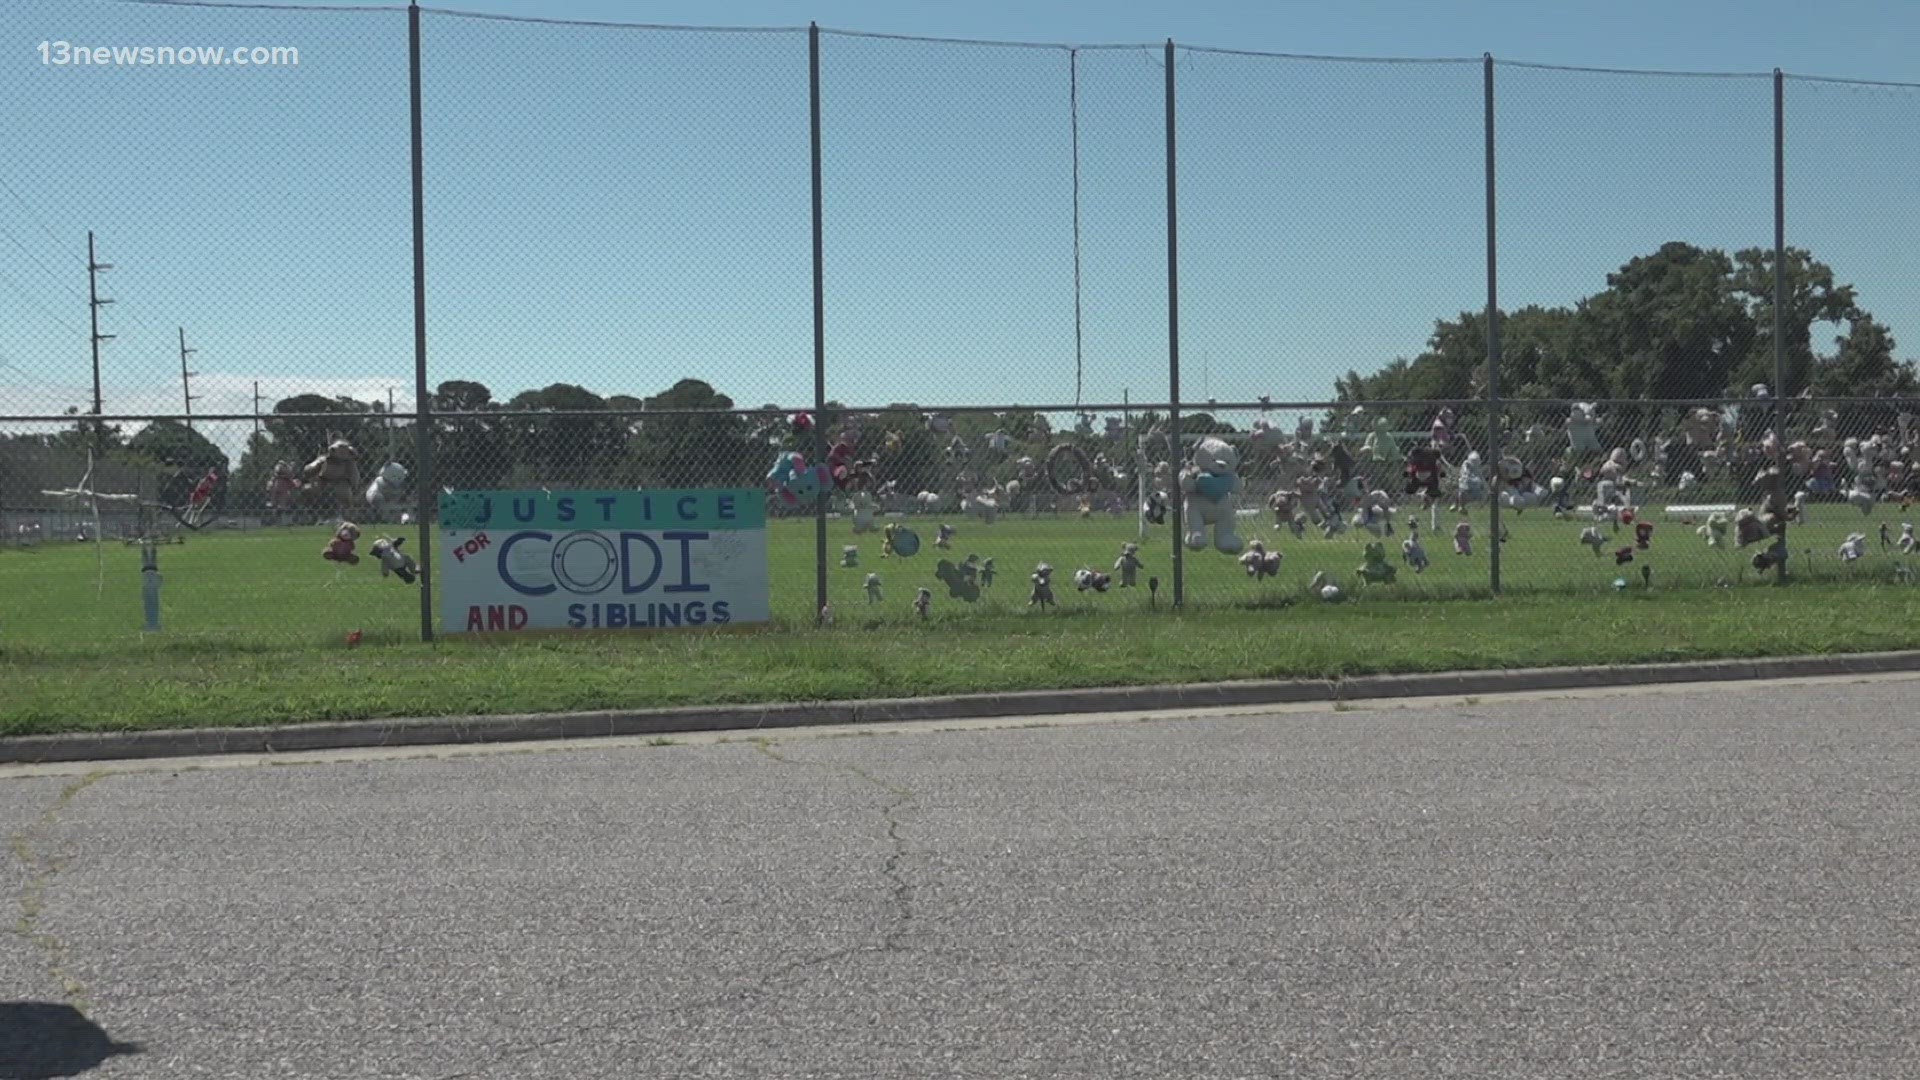 Hundreds of bikers rode from Williamsburg to Buckroe Pointe Apartments in Hampton, where there’s a memorial for Codi.